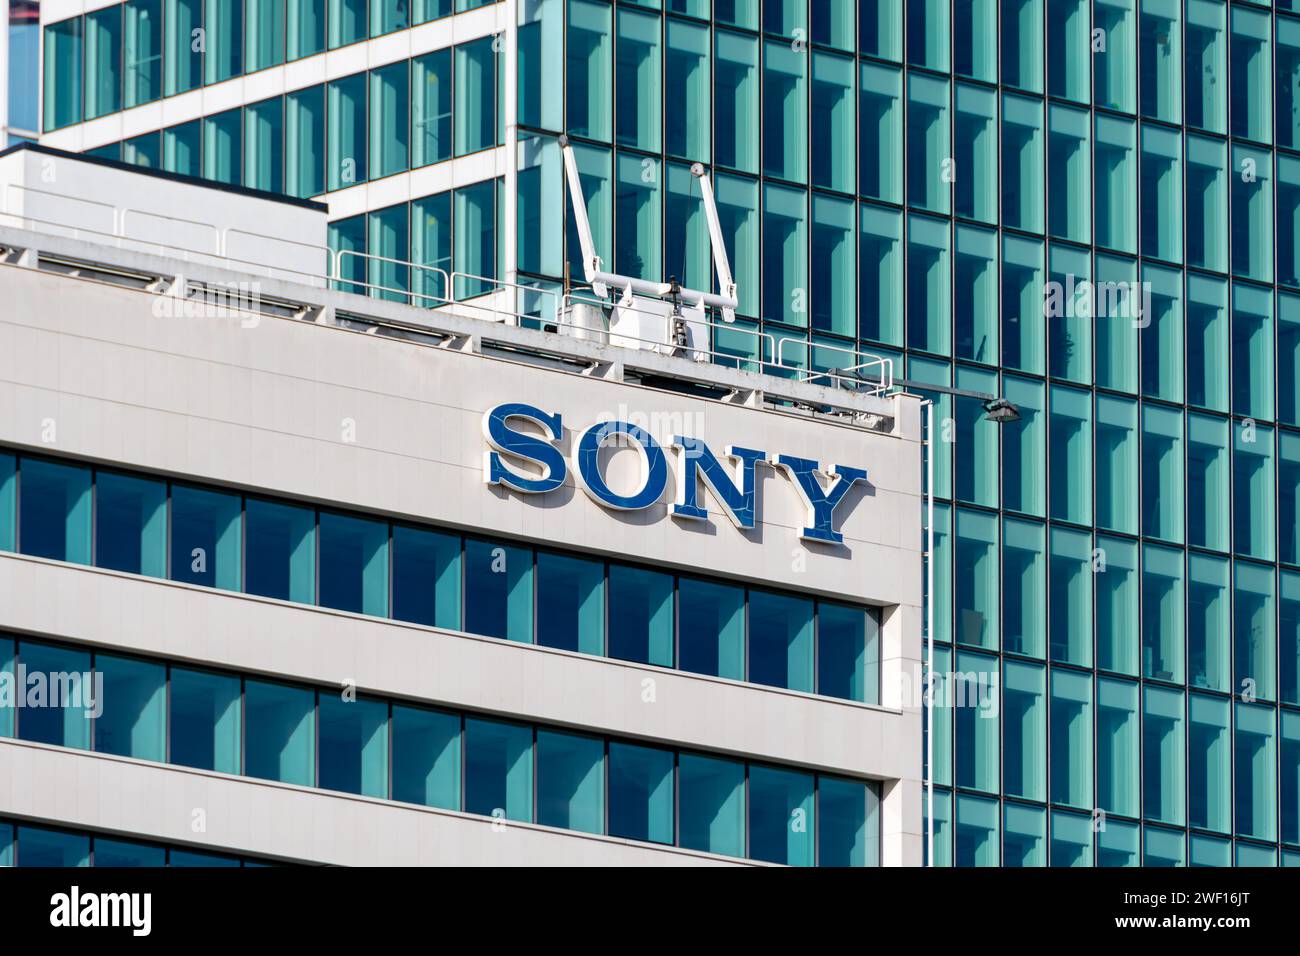 Sign and logo on the headquarters of Sony France, French subsidiary of the Japanese company Sony Corporation Stock Photo